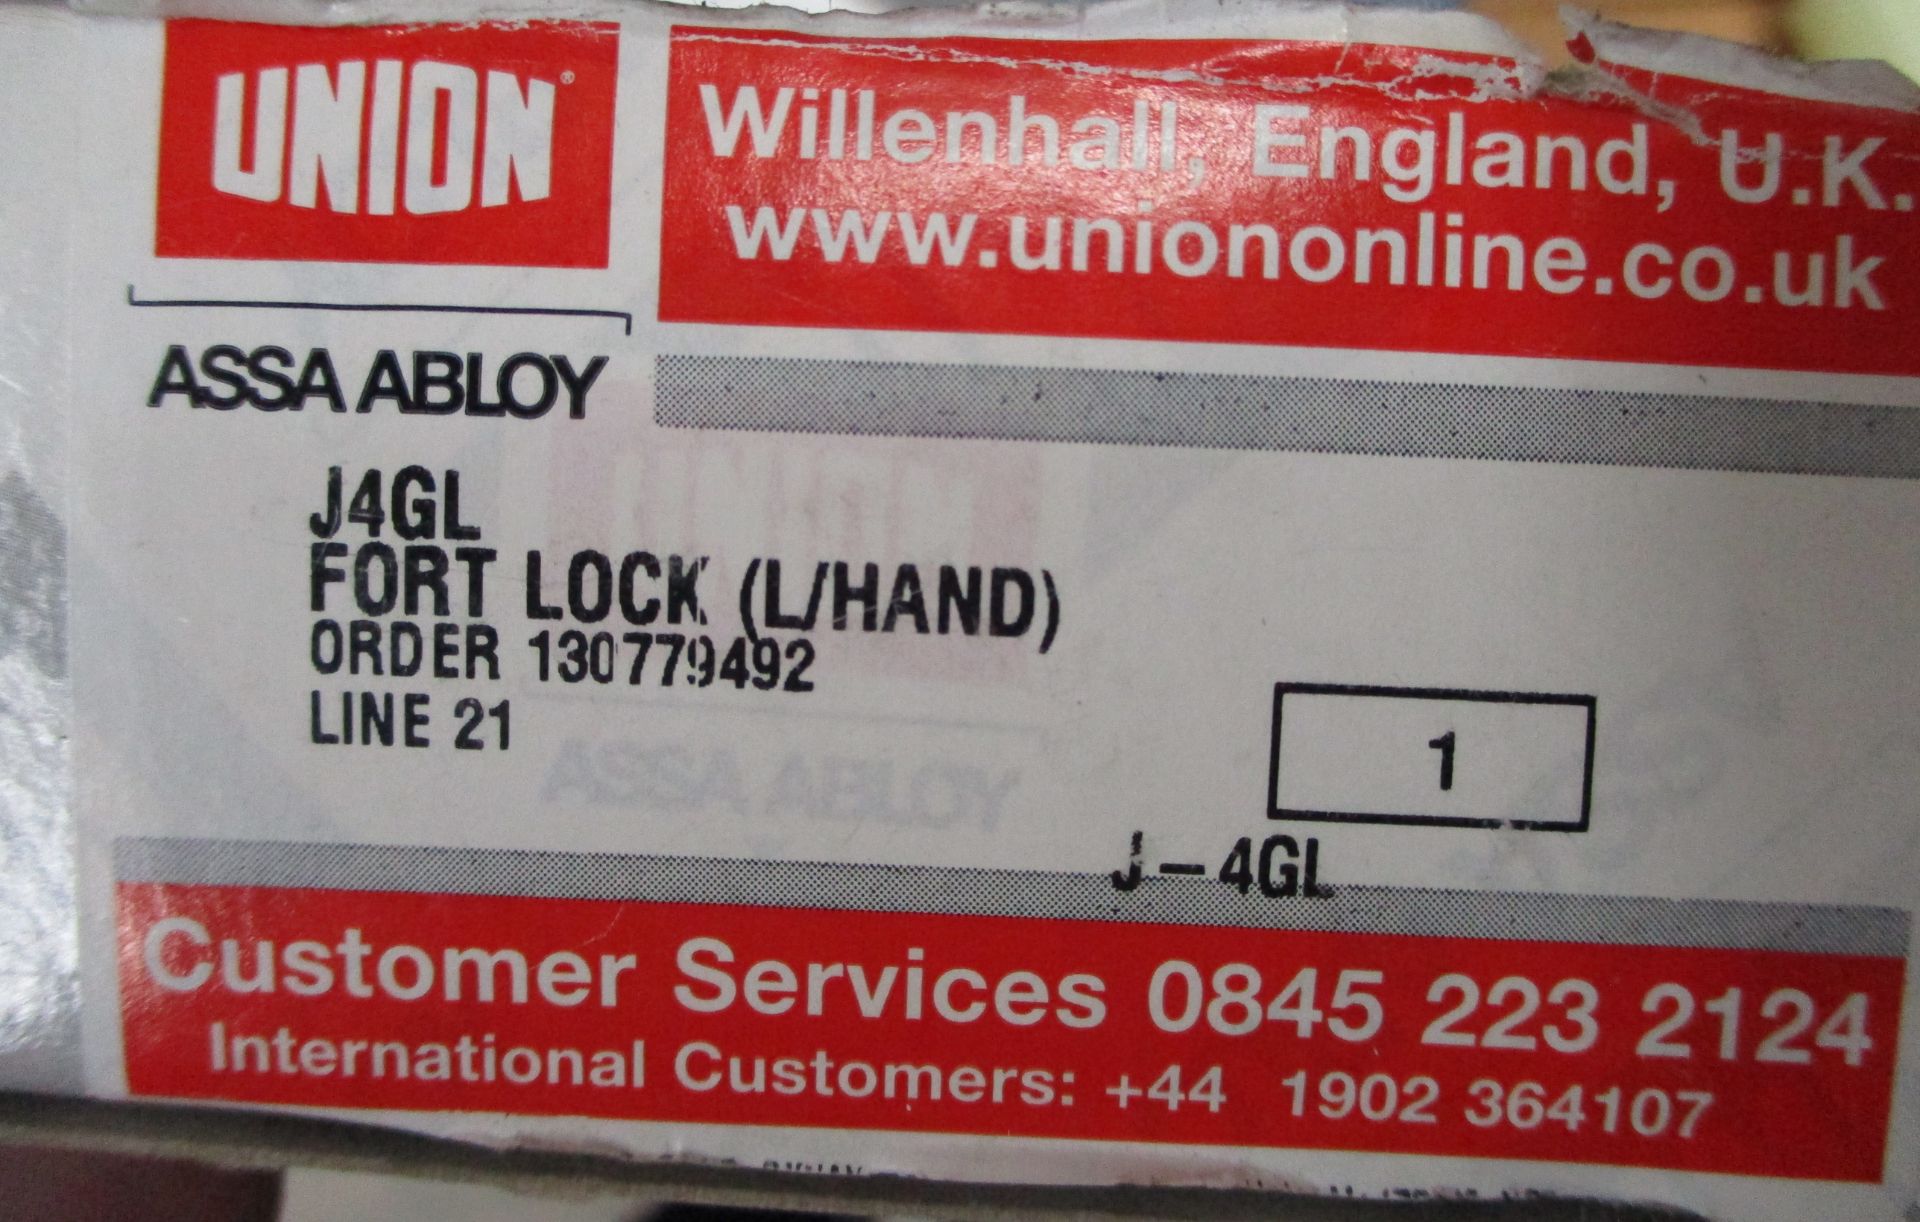 3 x Union Assa Abloy J4GL Fort Locks  - Brand New Stock - Product Code: J4GL- CL538 - Ref: Pallet - Image 2 of 4